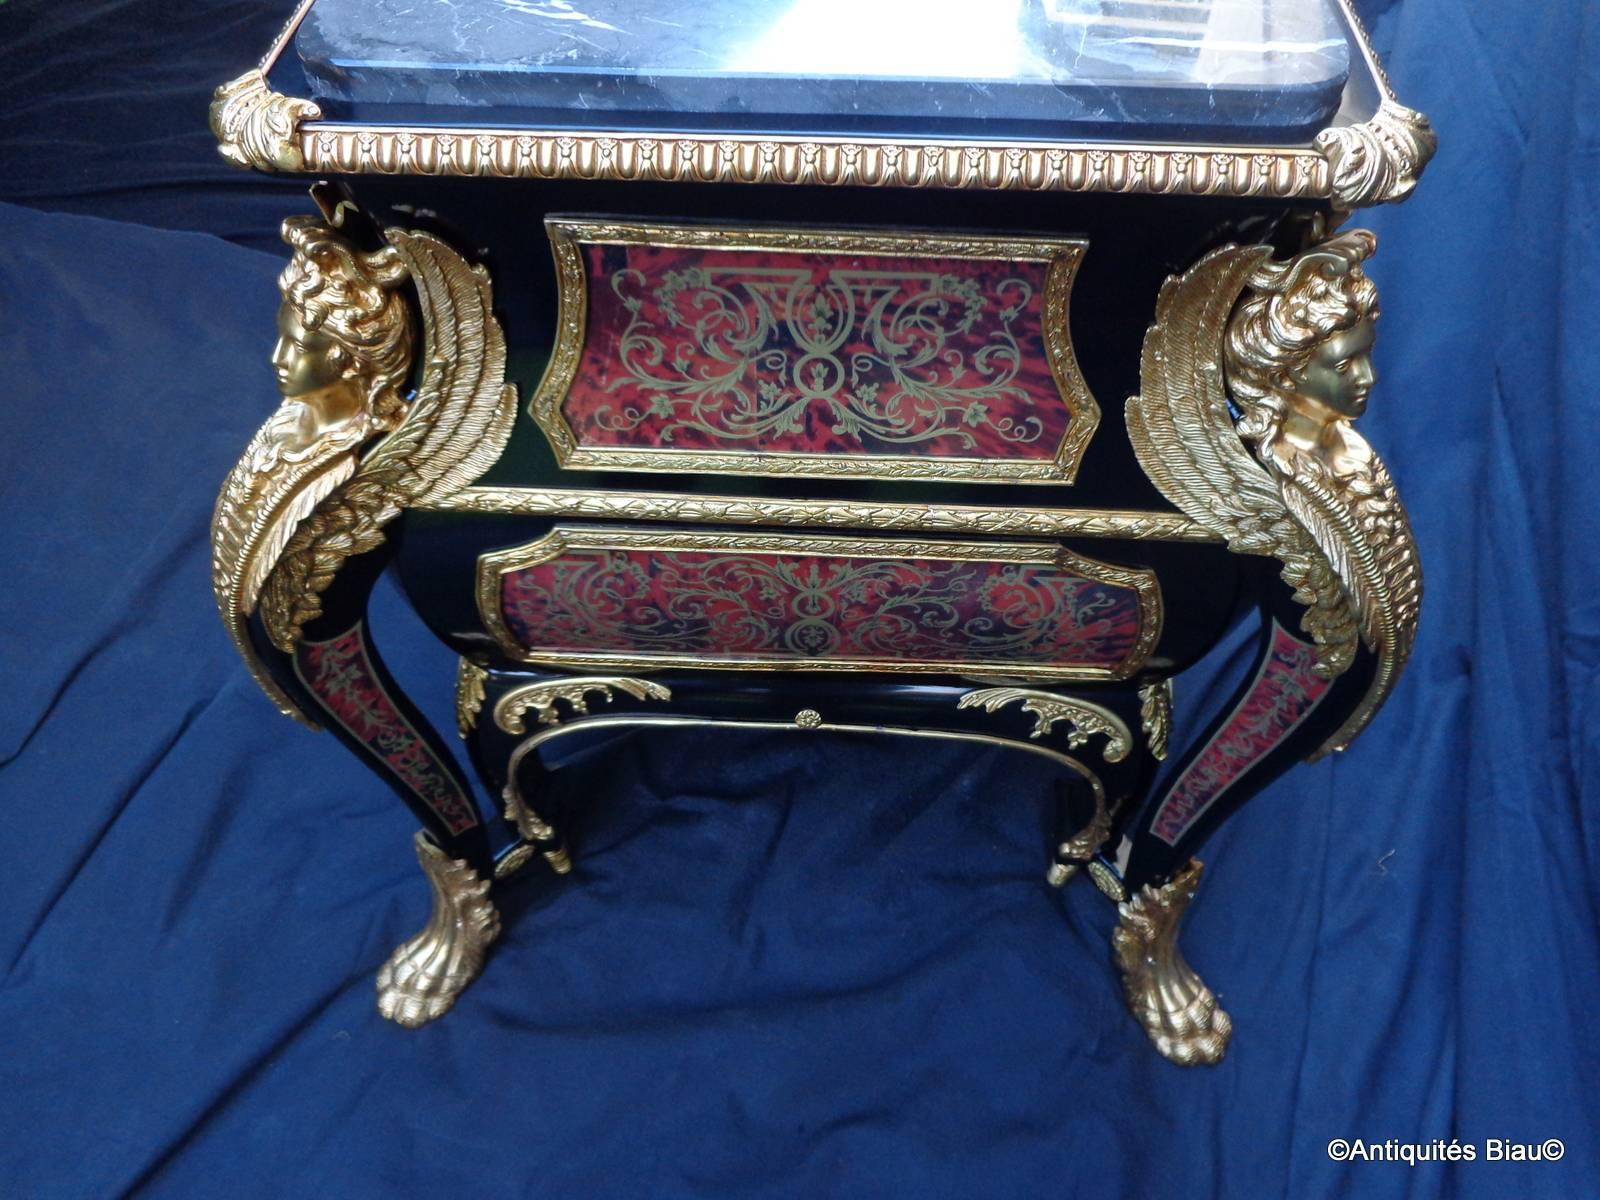 Dresser commode in Boulle marquetry manufacturing, circa 1970. Perfect condition.
Furniture opening on two drawers.
Marquetry work on all sides,
adorned a lot of gilded bronzes.
Four beautiful caryatids, fine and beautifully crafted.
Cabinet